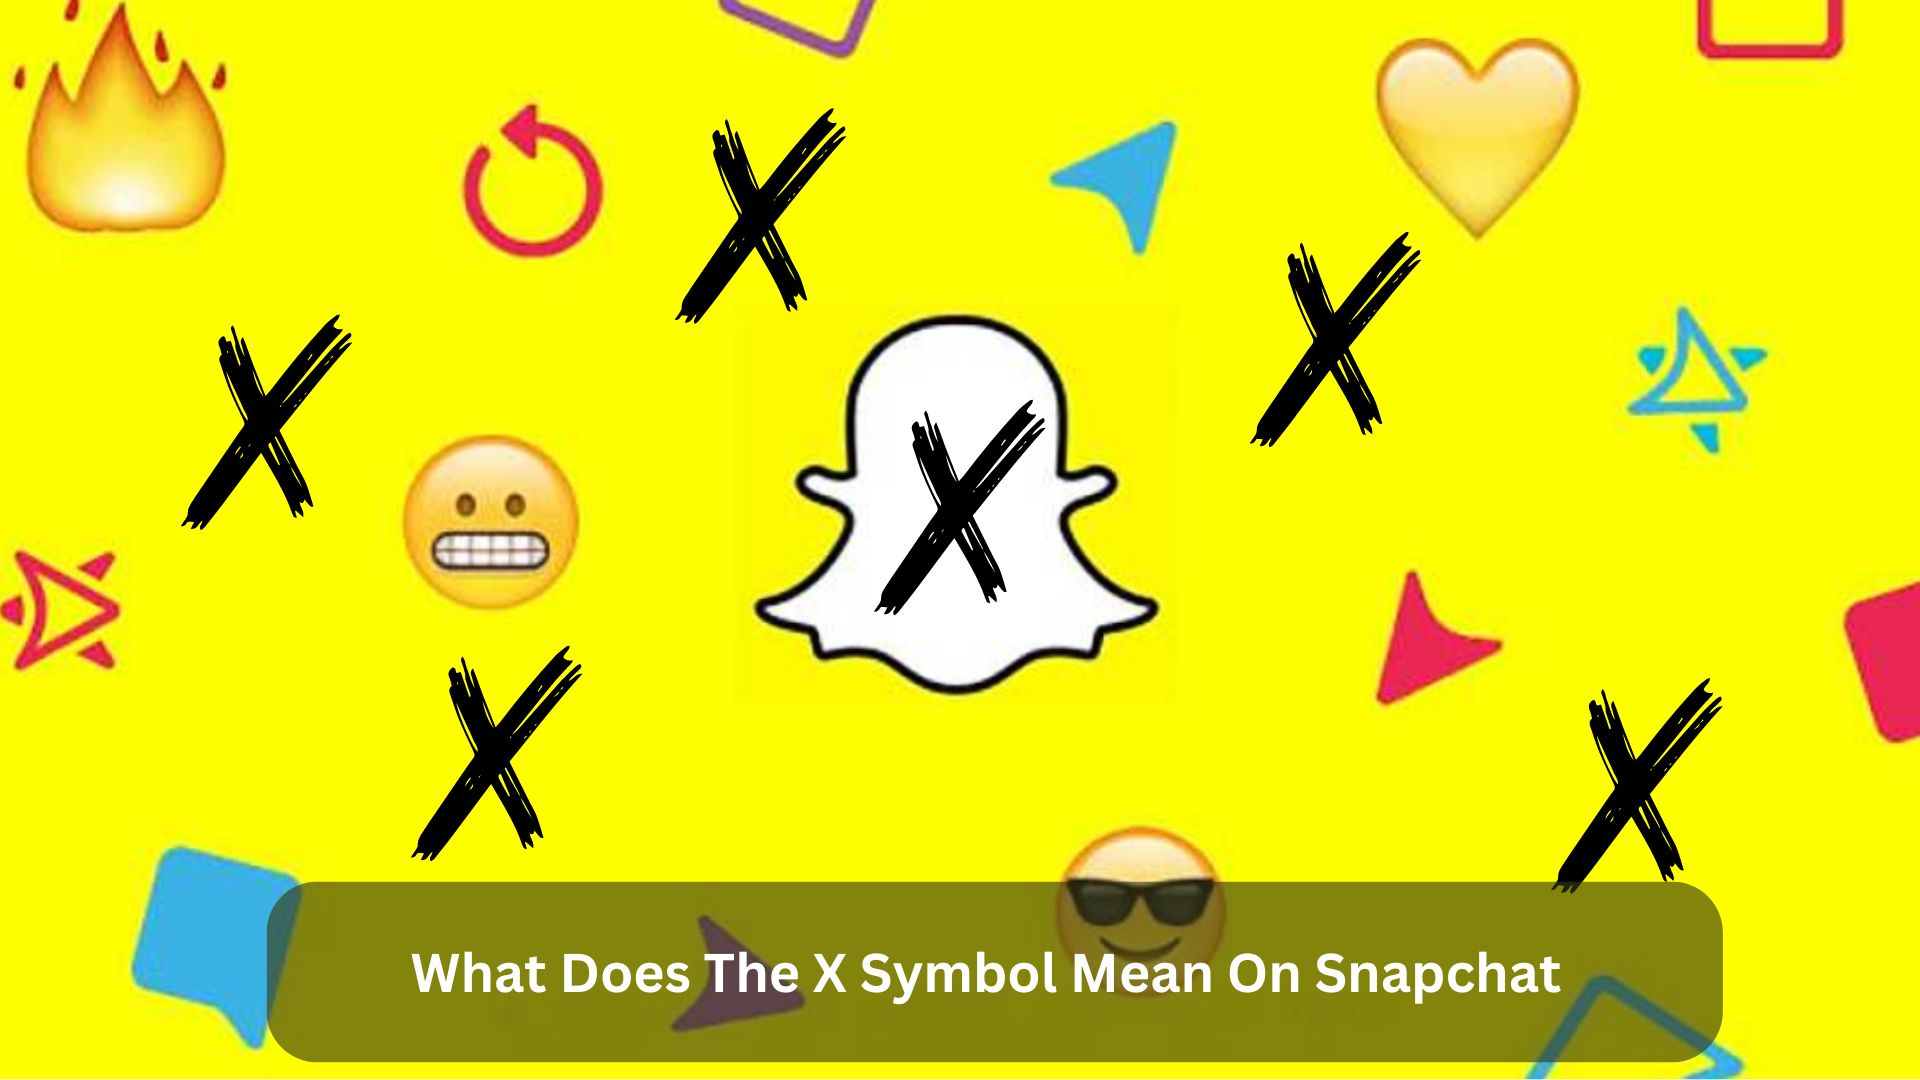 What Does The X Symbol Mean On Snapchat